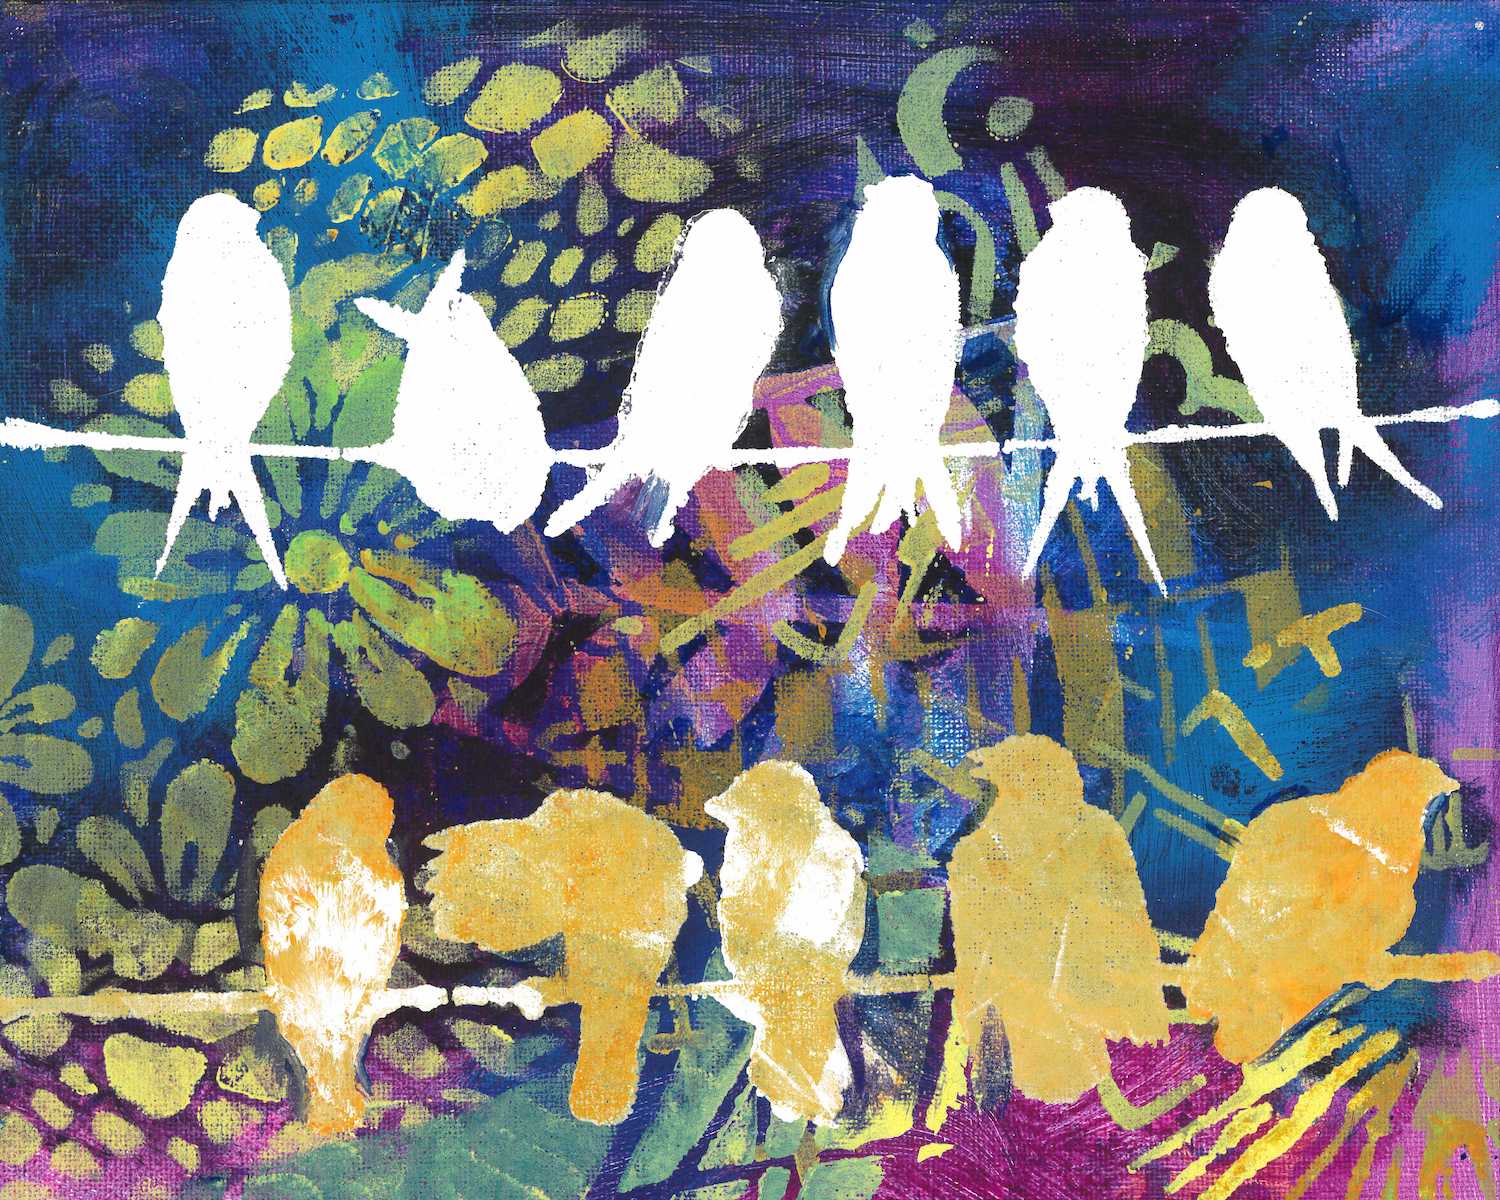 An acrylic painting of white and gold birds on a colourful, patterned background.